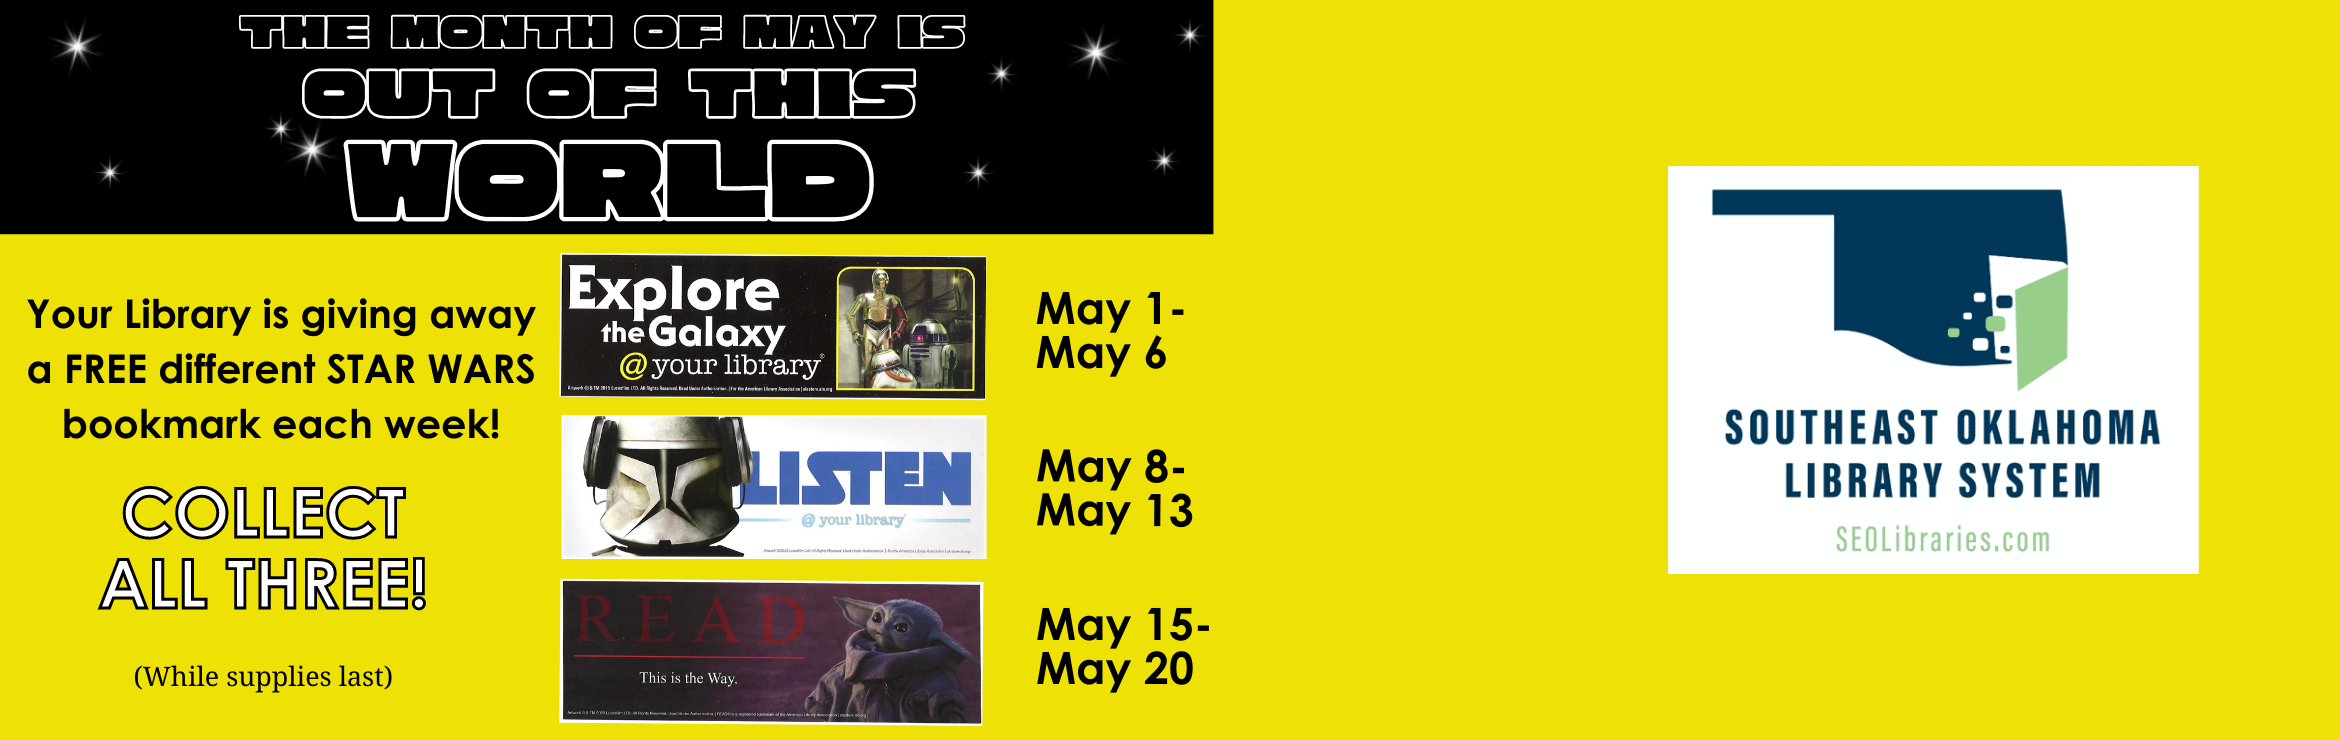 Free Star Wars Bookmarks for the month of May!